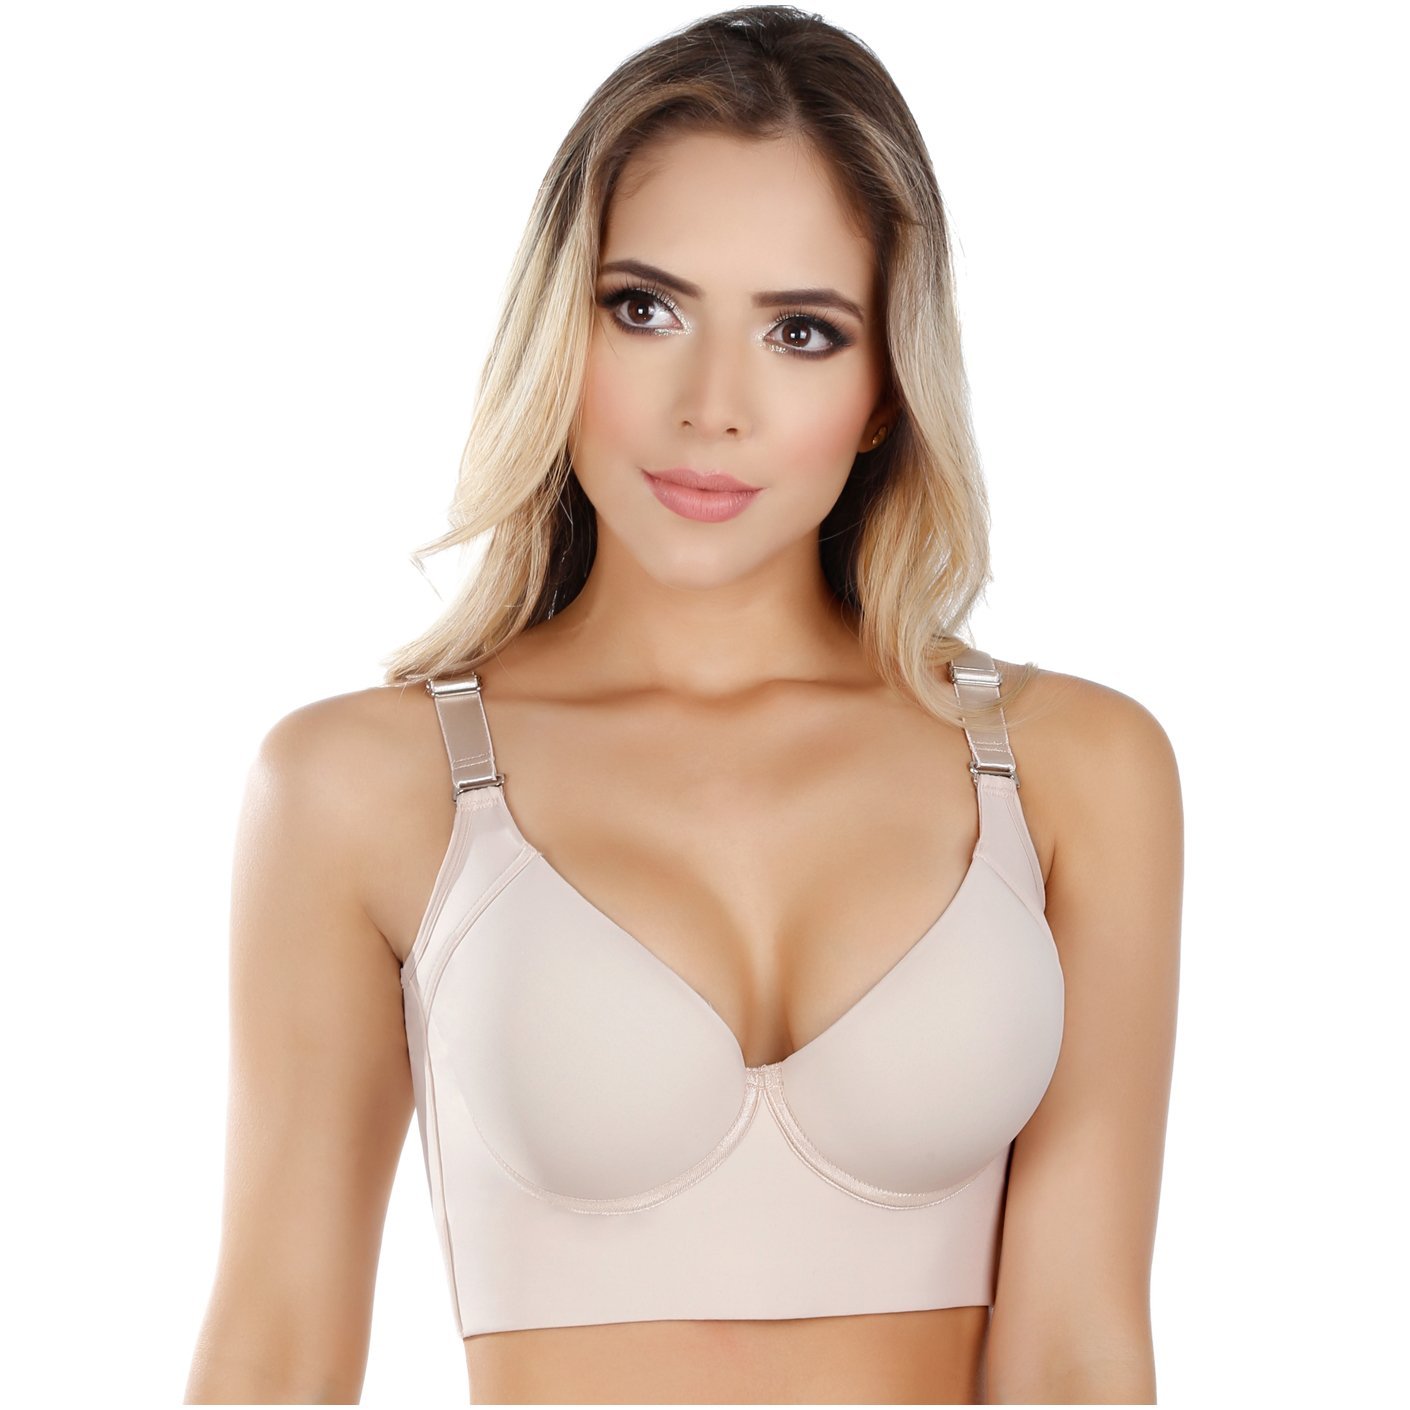 UPlady 8532 Extra Firm High Compression Full Cup Push Up Bra - New England Supplier